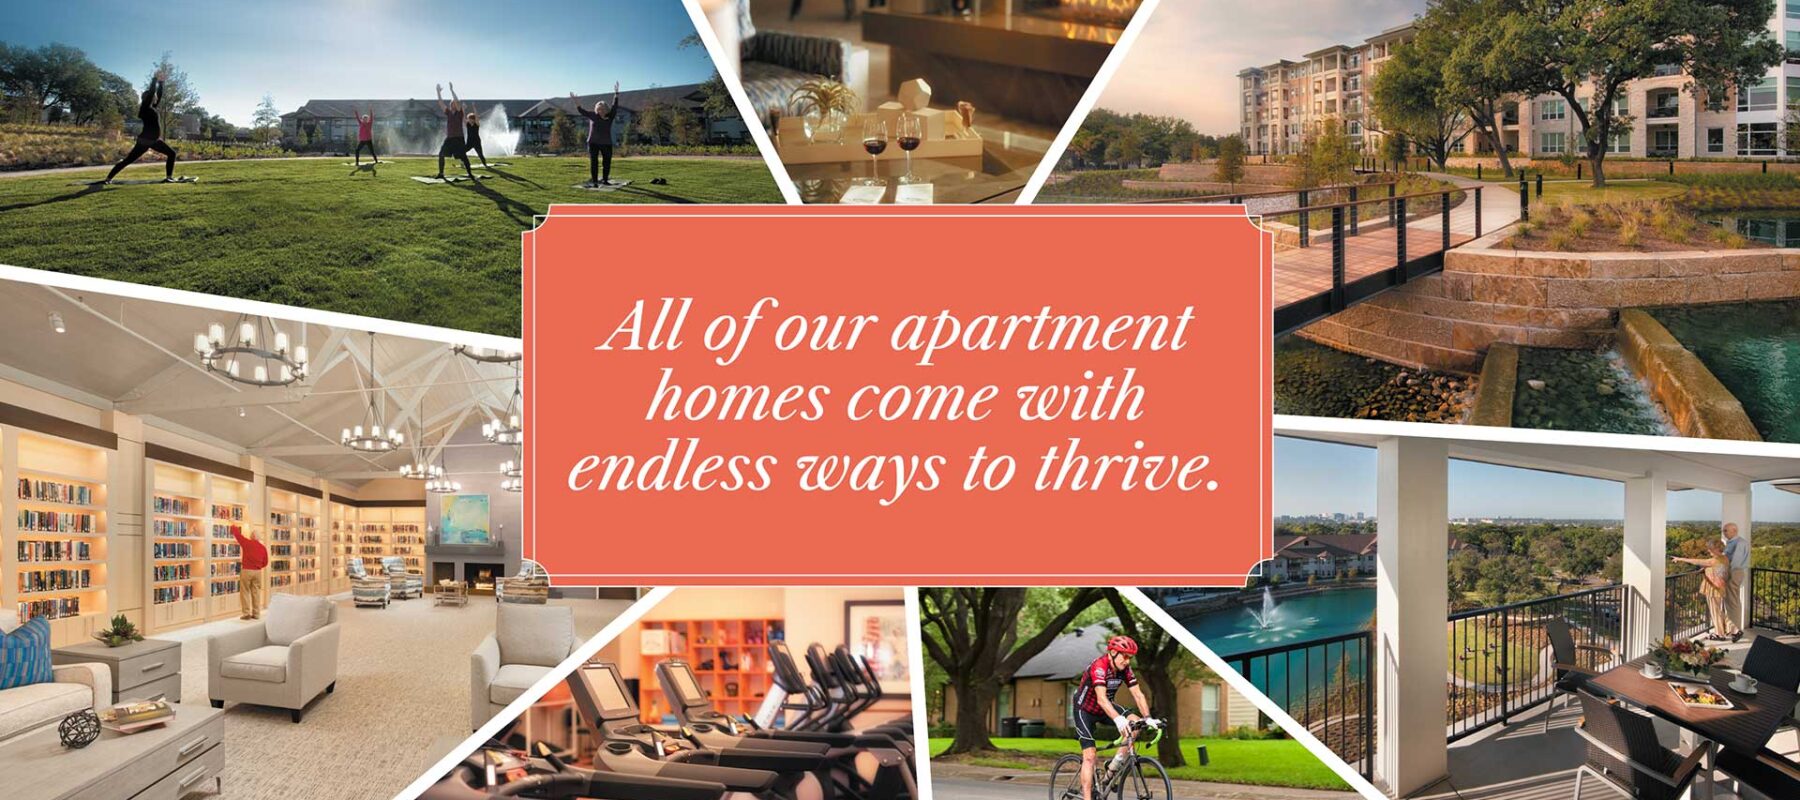 All of our apartment homes come with endless ways to thrive.